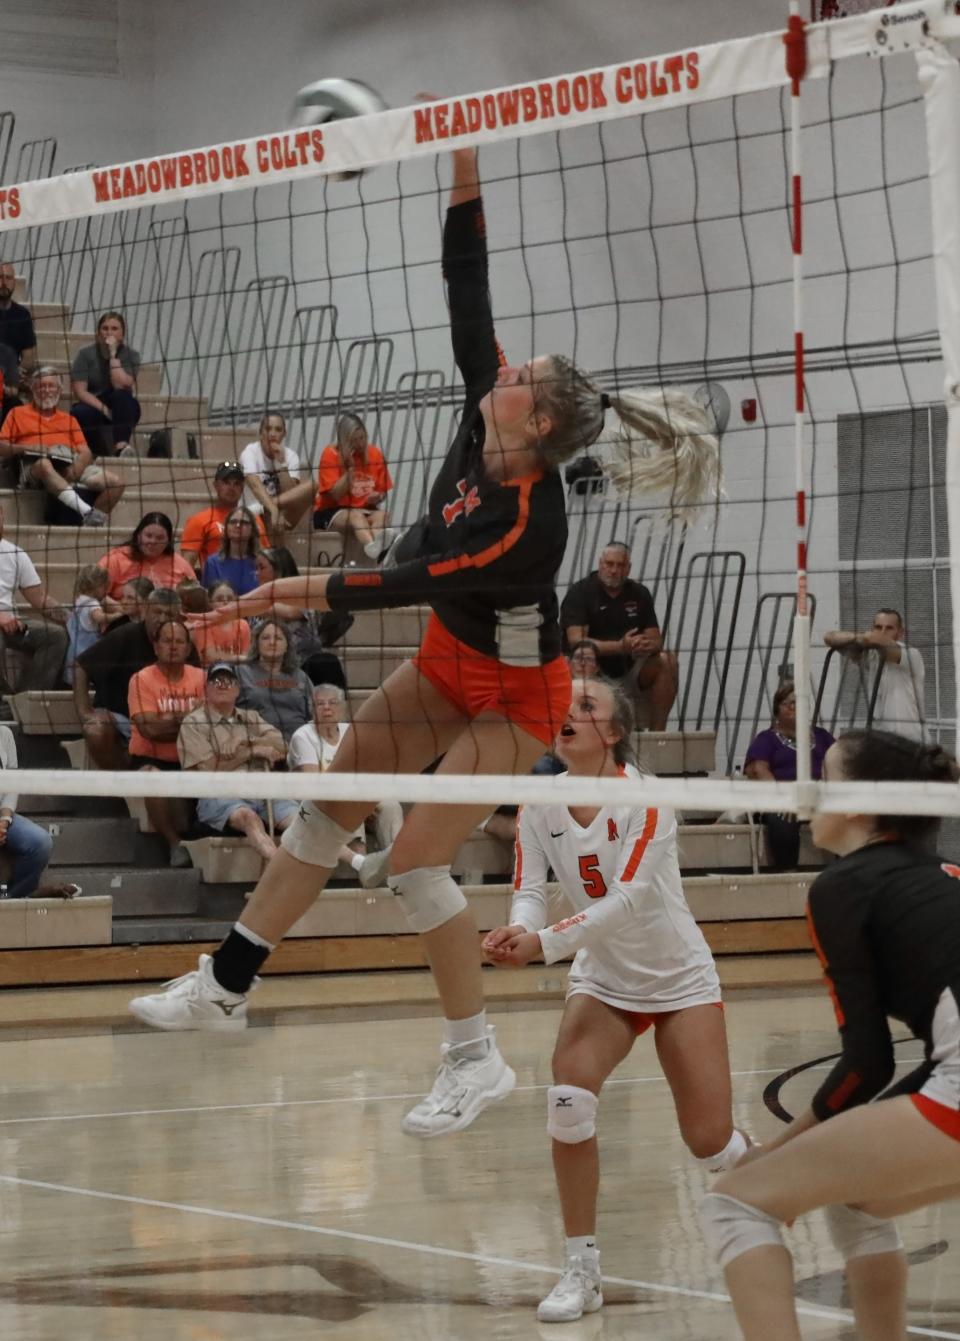 Meadowbrook's Camden Black (7) spikes the ball during Tuesday's MVL volleyball match with Tri-Valley at Meadowbrook High School.